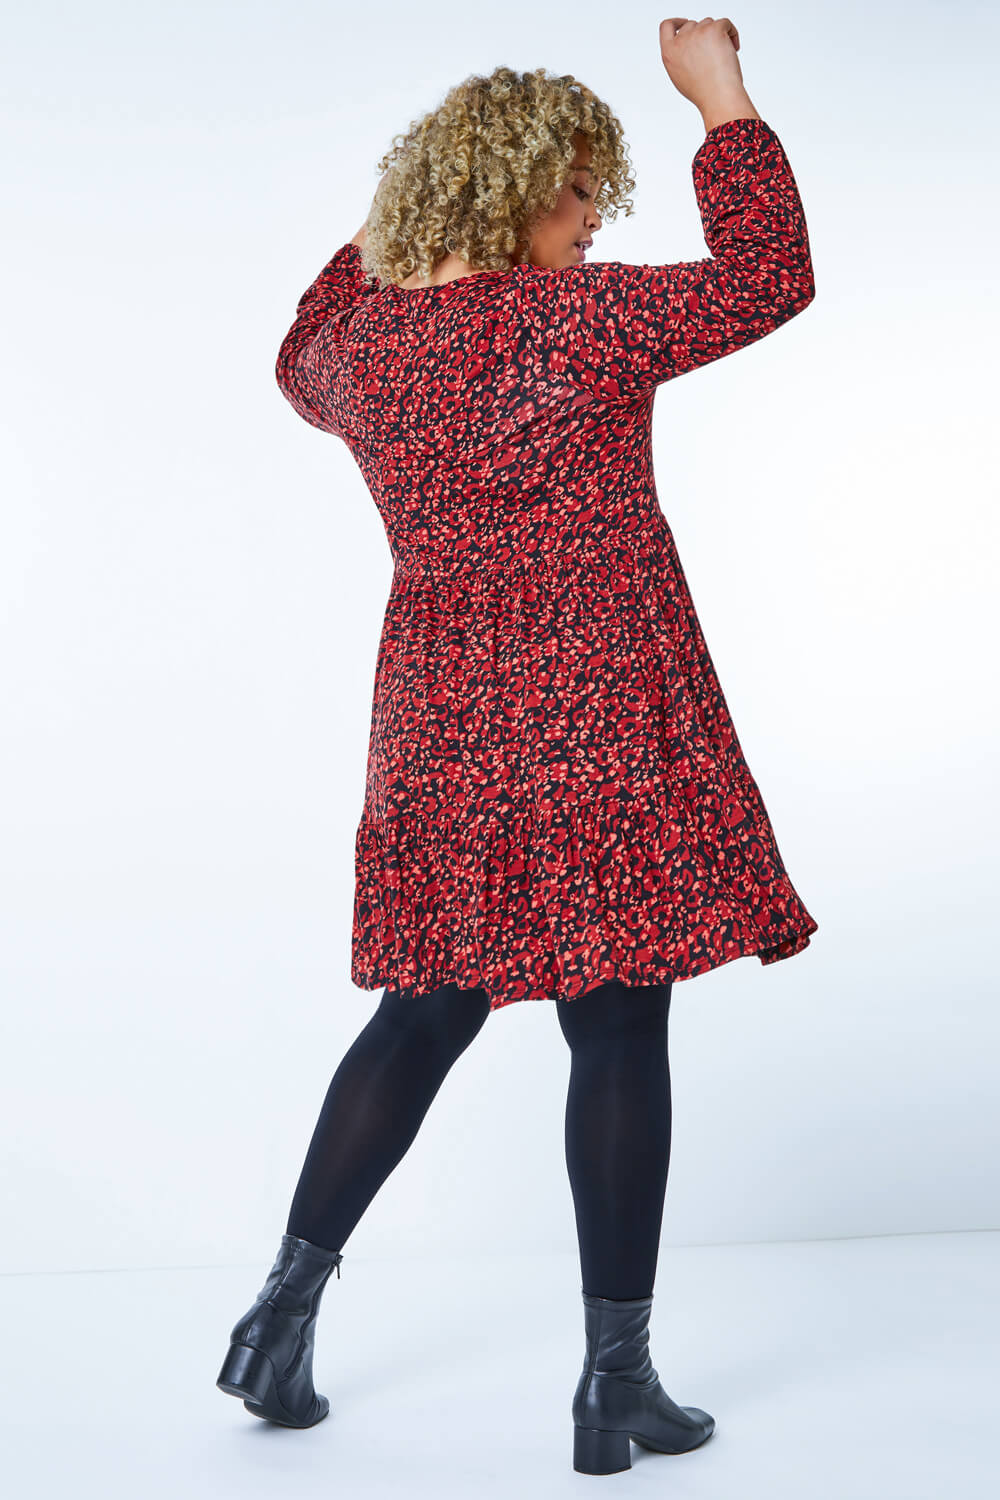 Red Curve Leopard Print Tiered Tunic Dress, Image 4 of 6